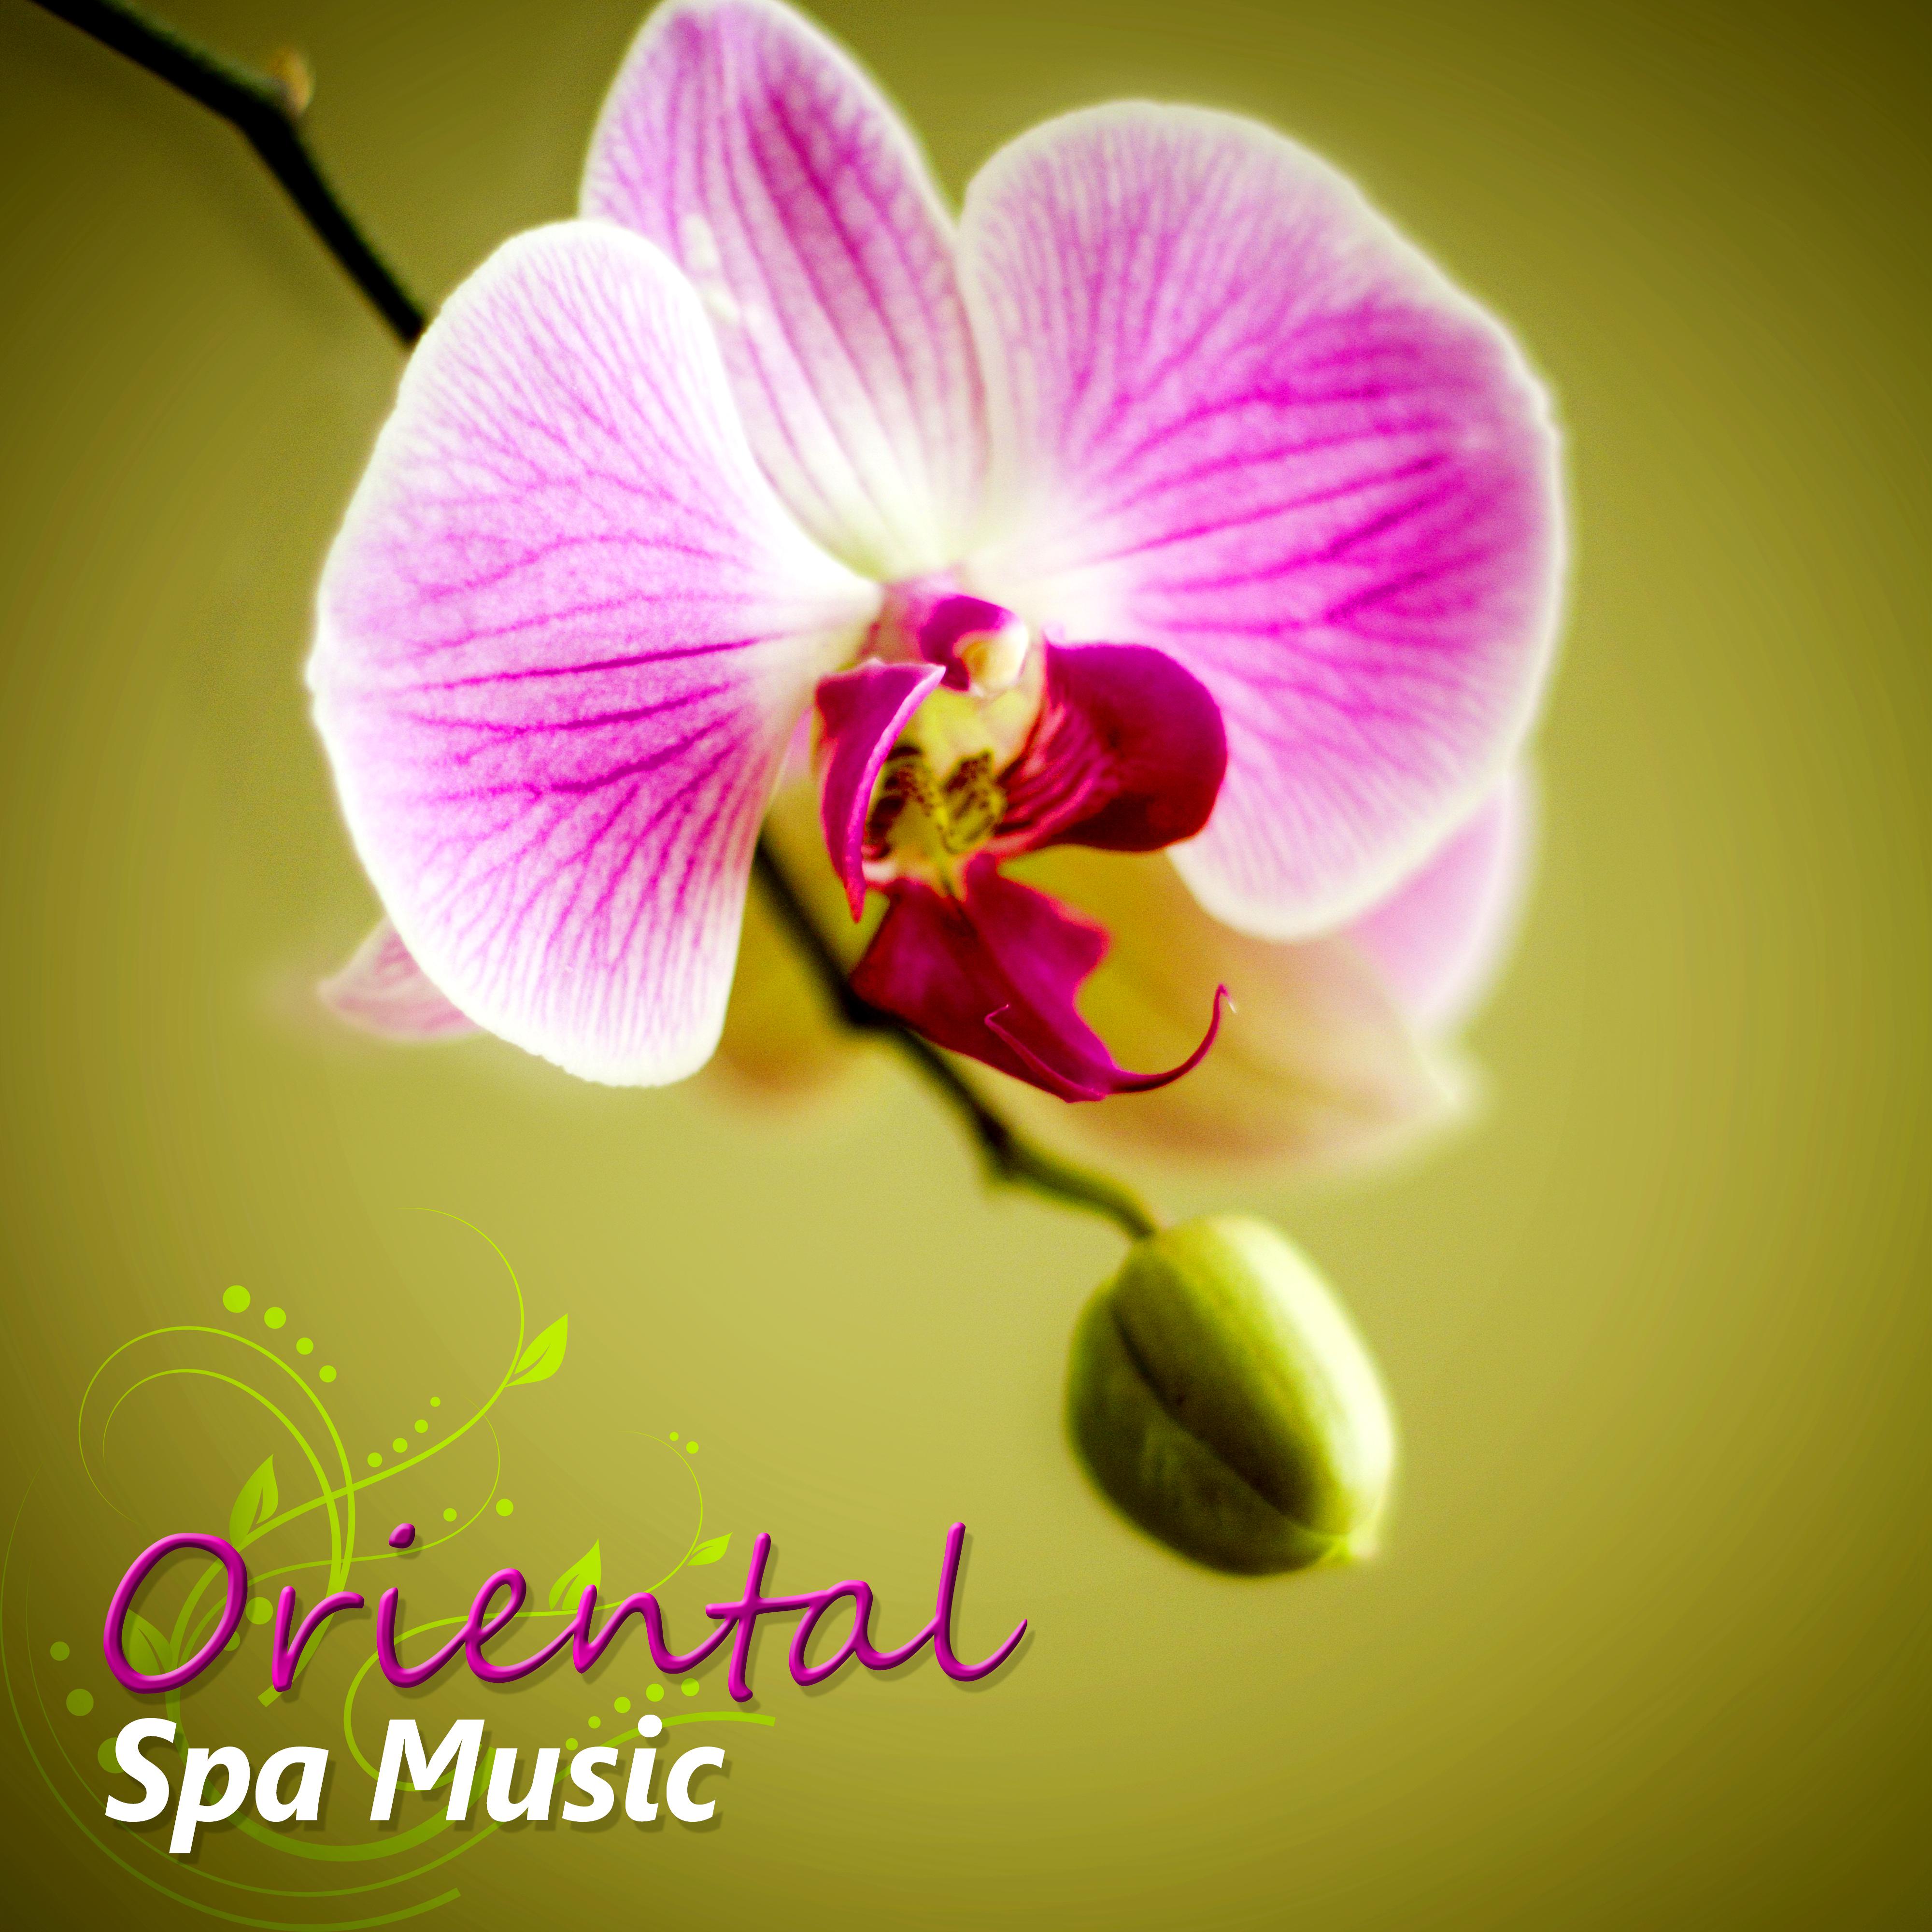 Oriental Spa Music – Relaxing Massage Music, Guitar Music for Relaxation, Stress Relief Healing Sounds, Just Relax and Calm Down, Orient Music for Thai Massage